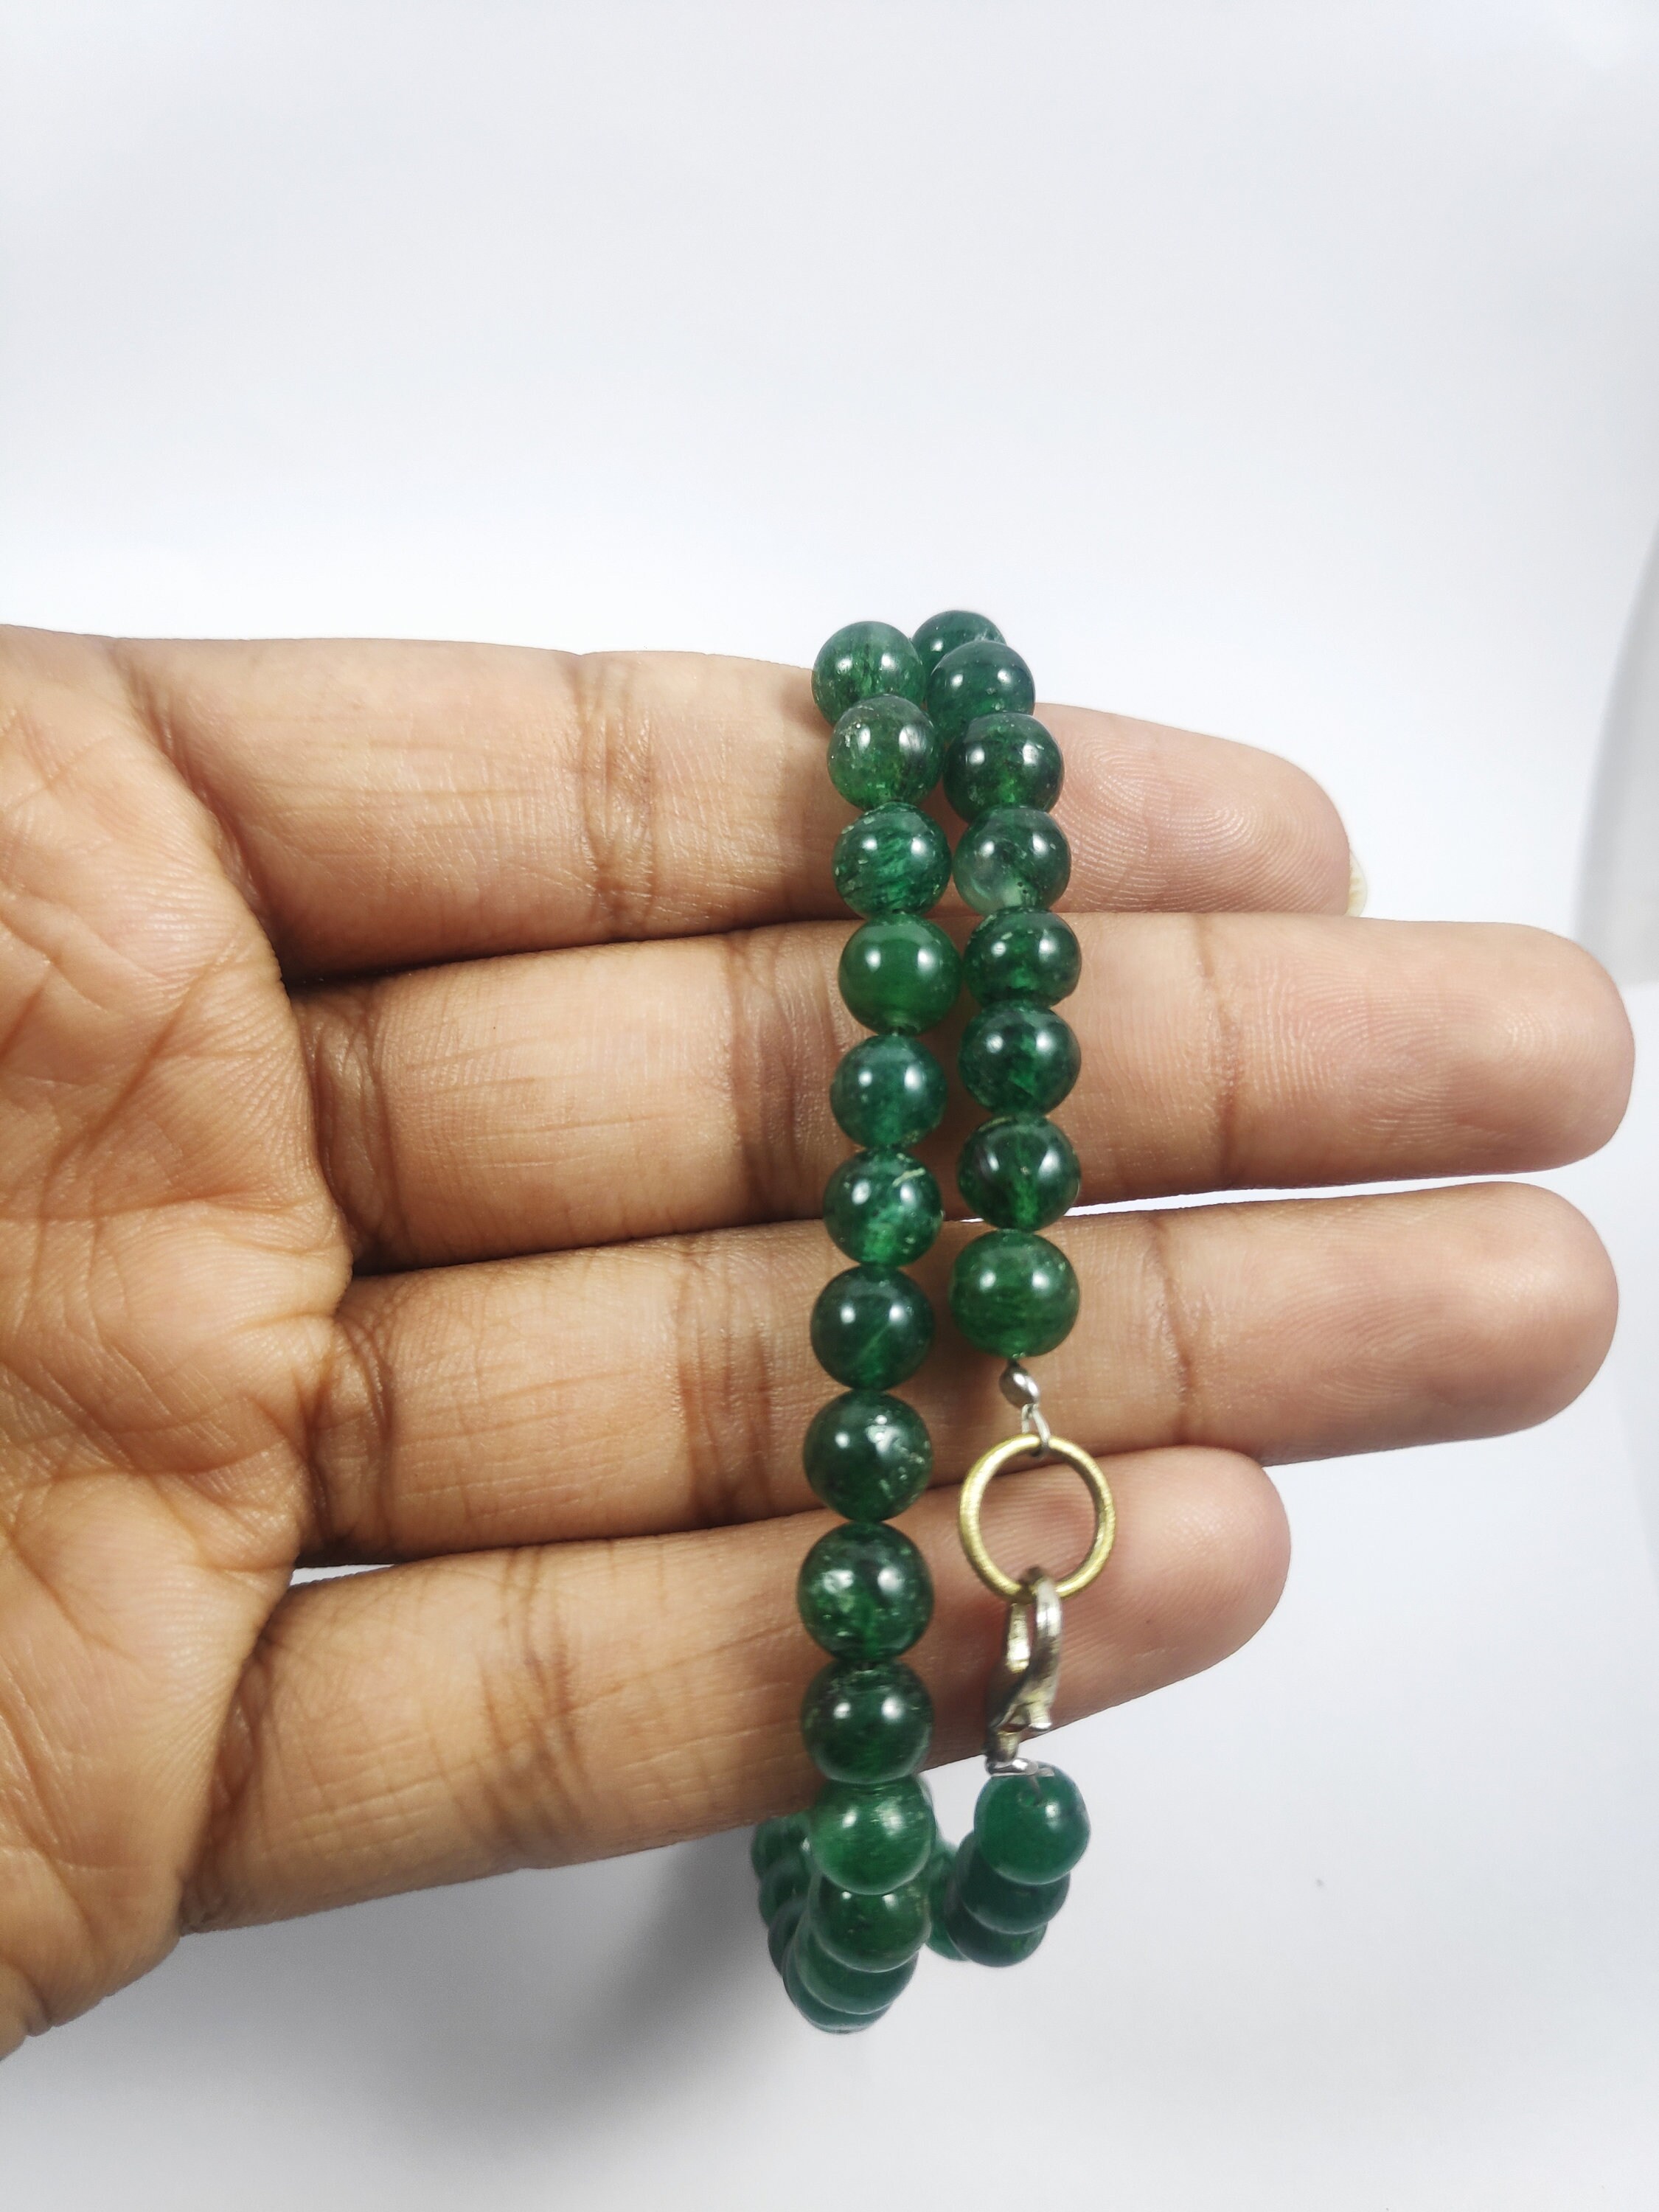 12MM AAA NATURAL GREEN JADE BEADS NECKLACE 18" 